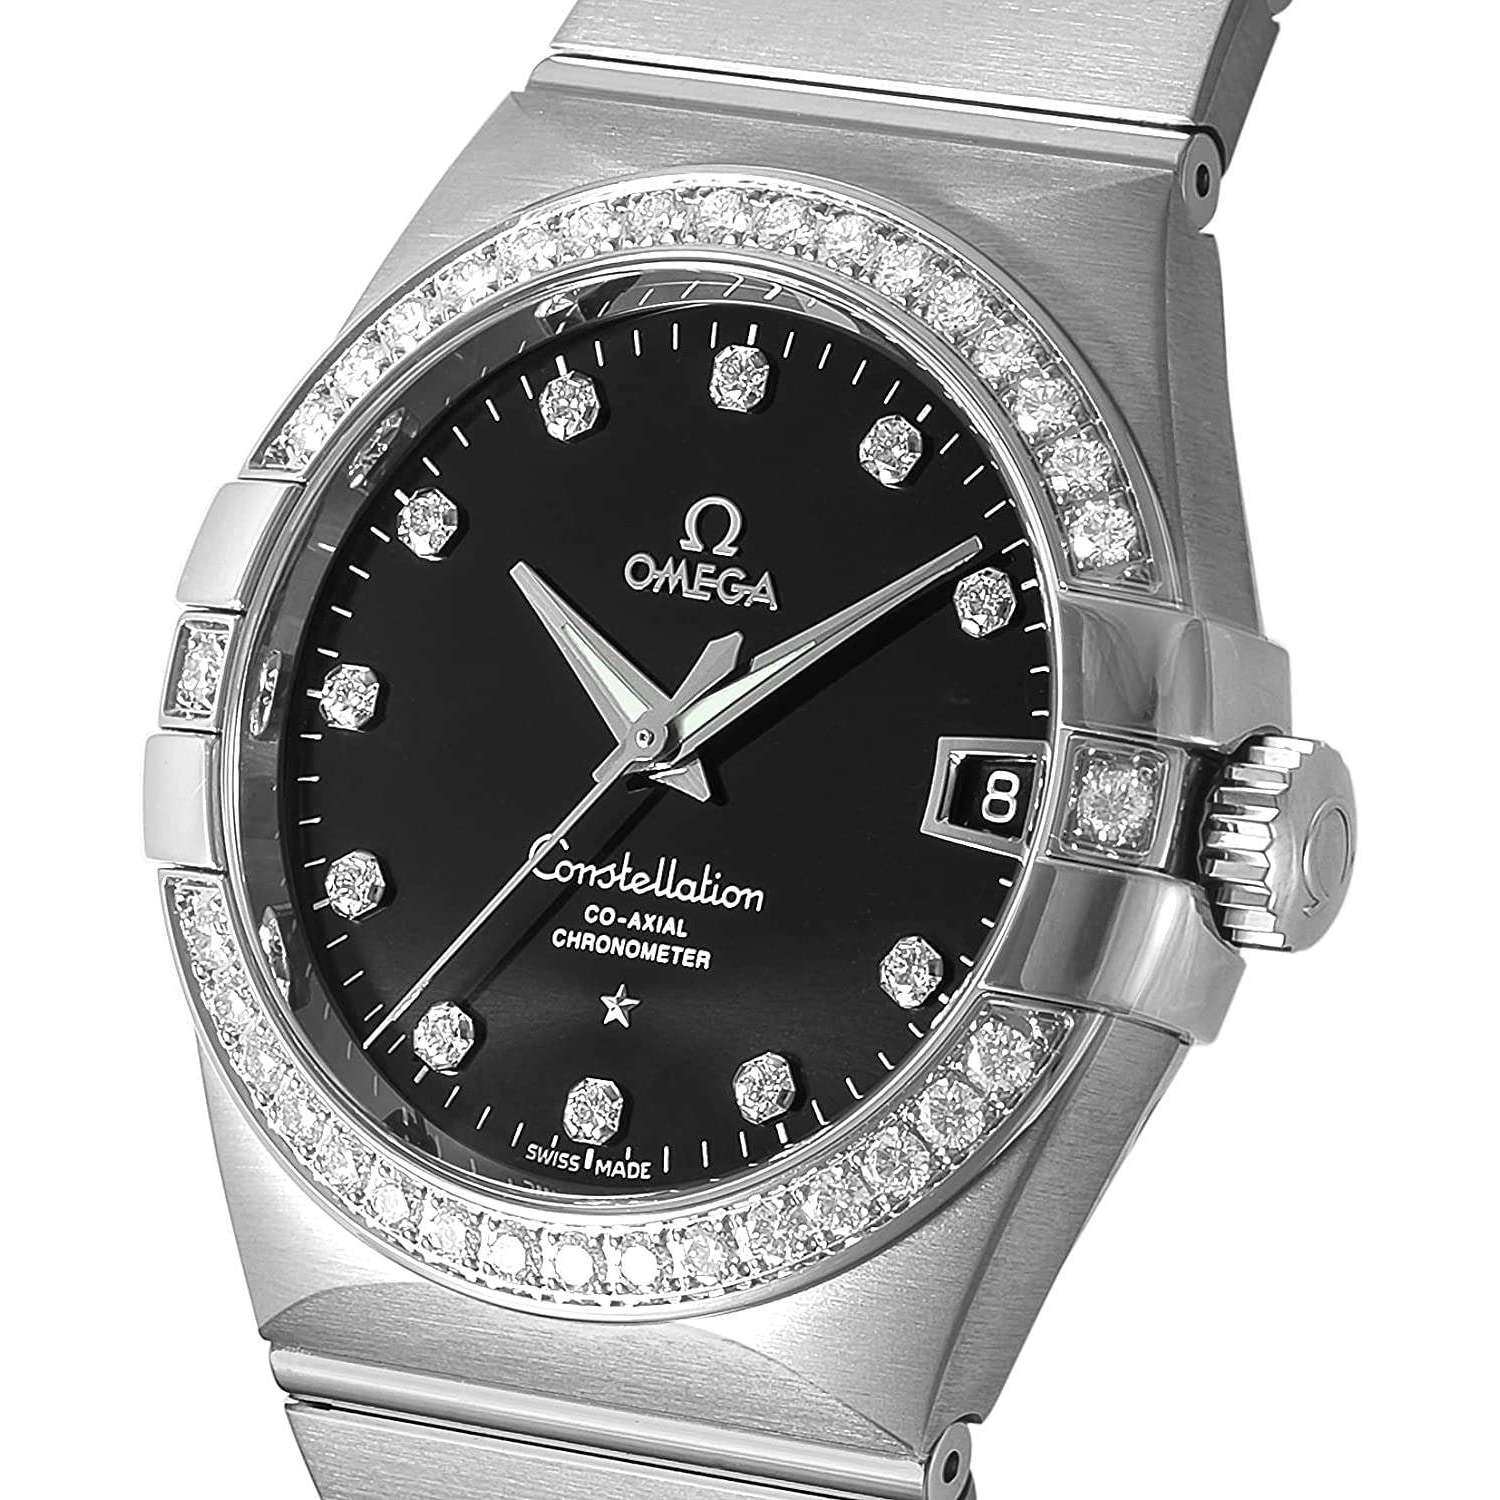 ROOK JAPAN:OMEGA CONSTELLATION CO-AXIAL CHRONOMETER 37.5 MM MEN WATCH 123.55.38.21.51.001,Luxury Watch,Omega